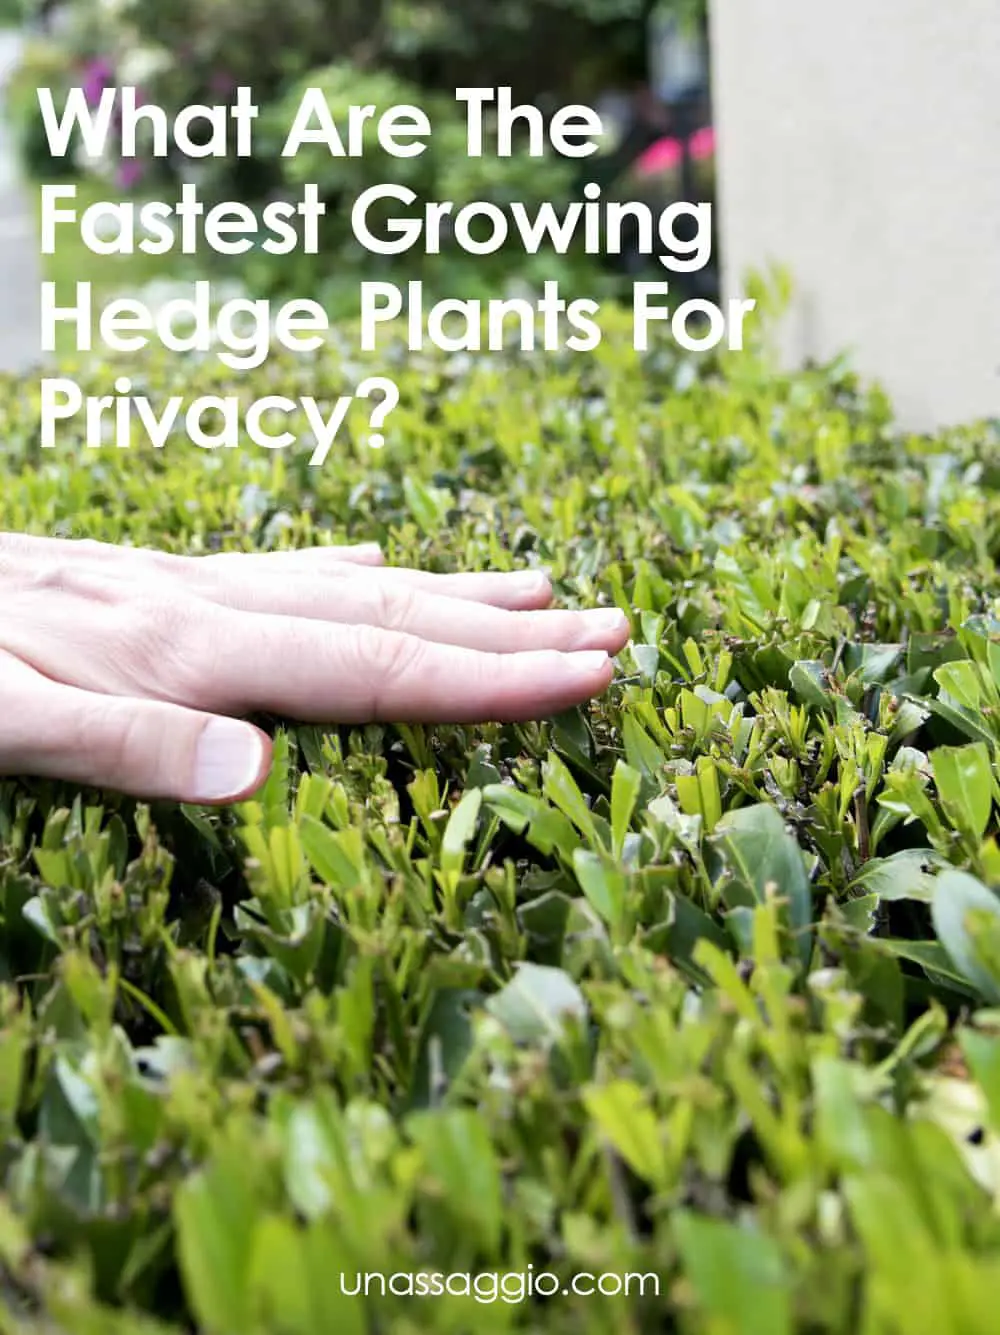 What Are The Fastest Growing Hedge Plants For Privacy